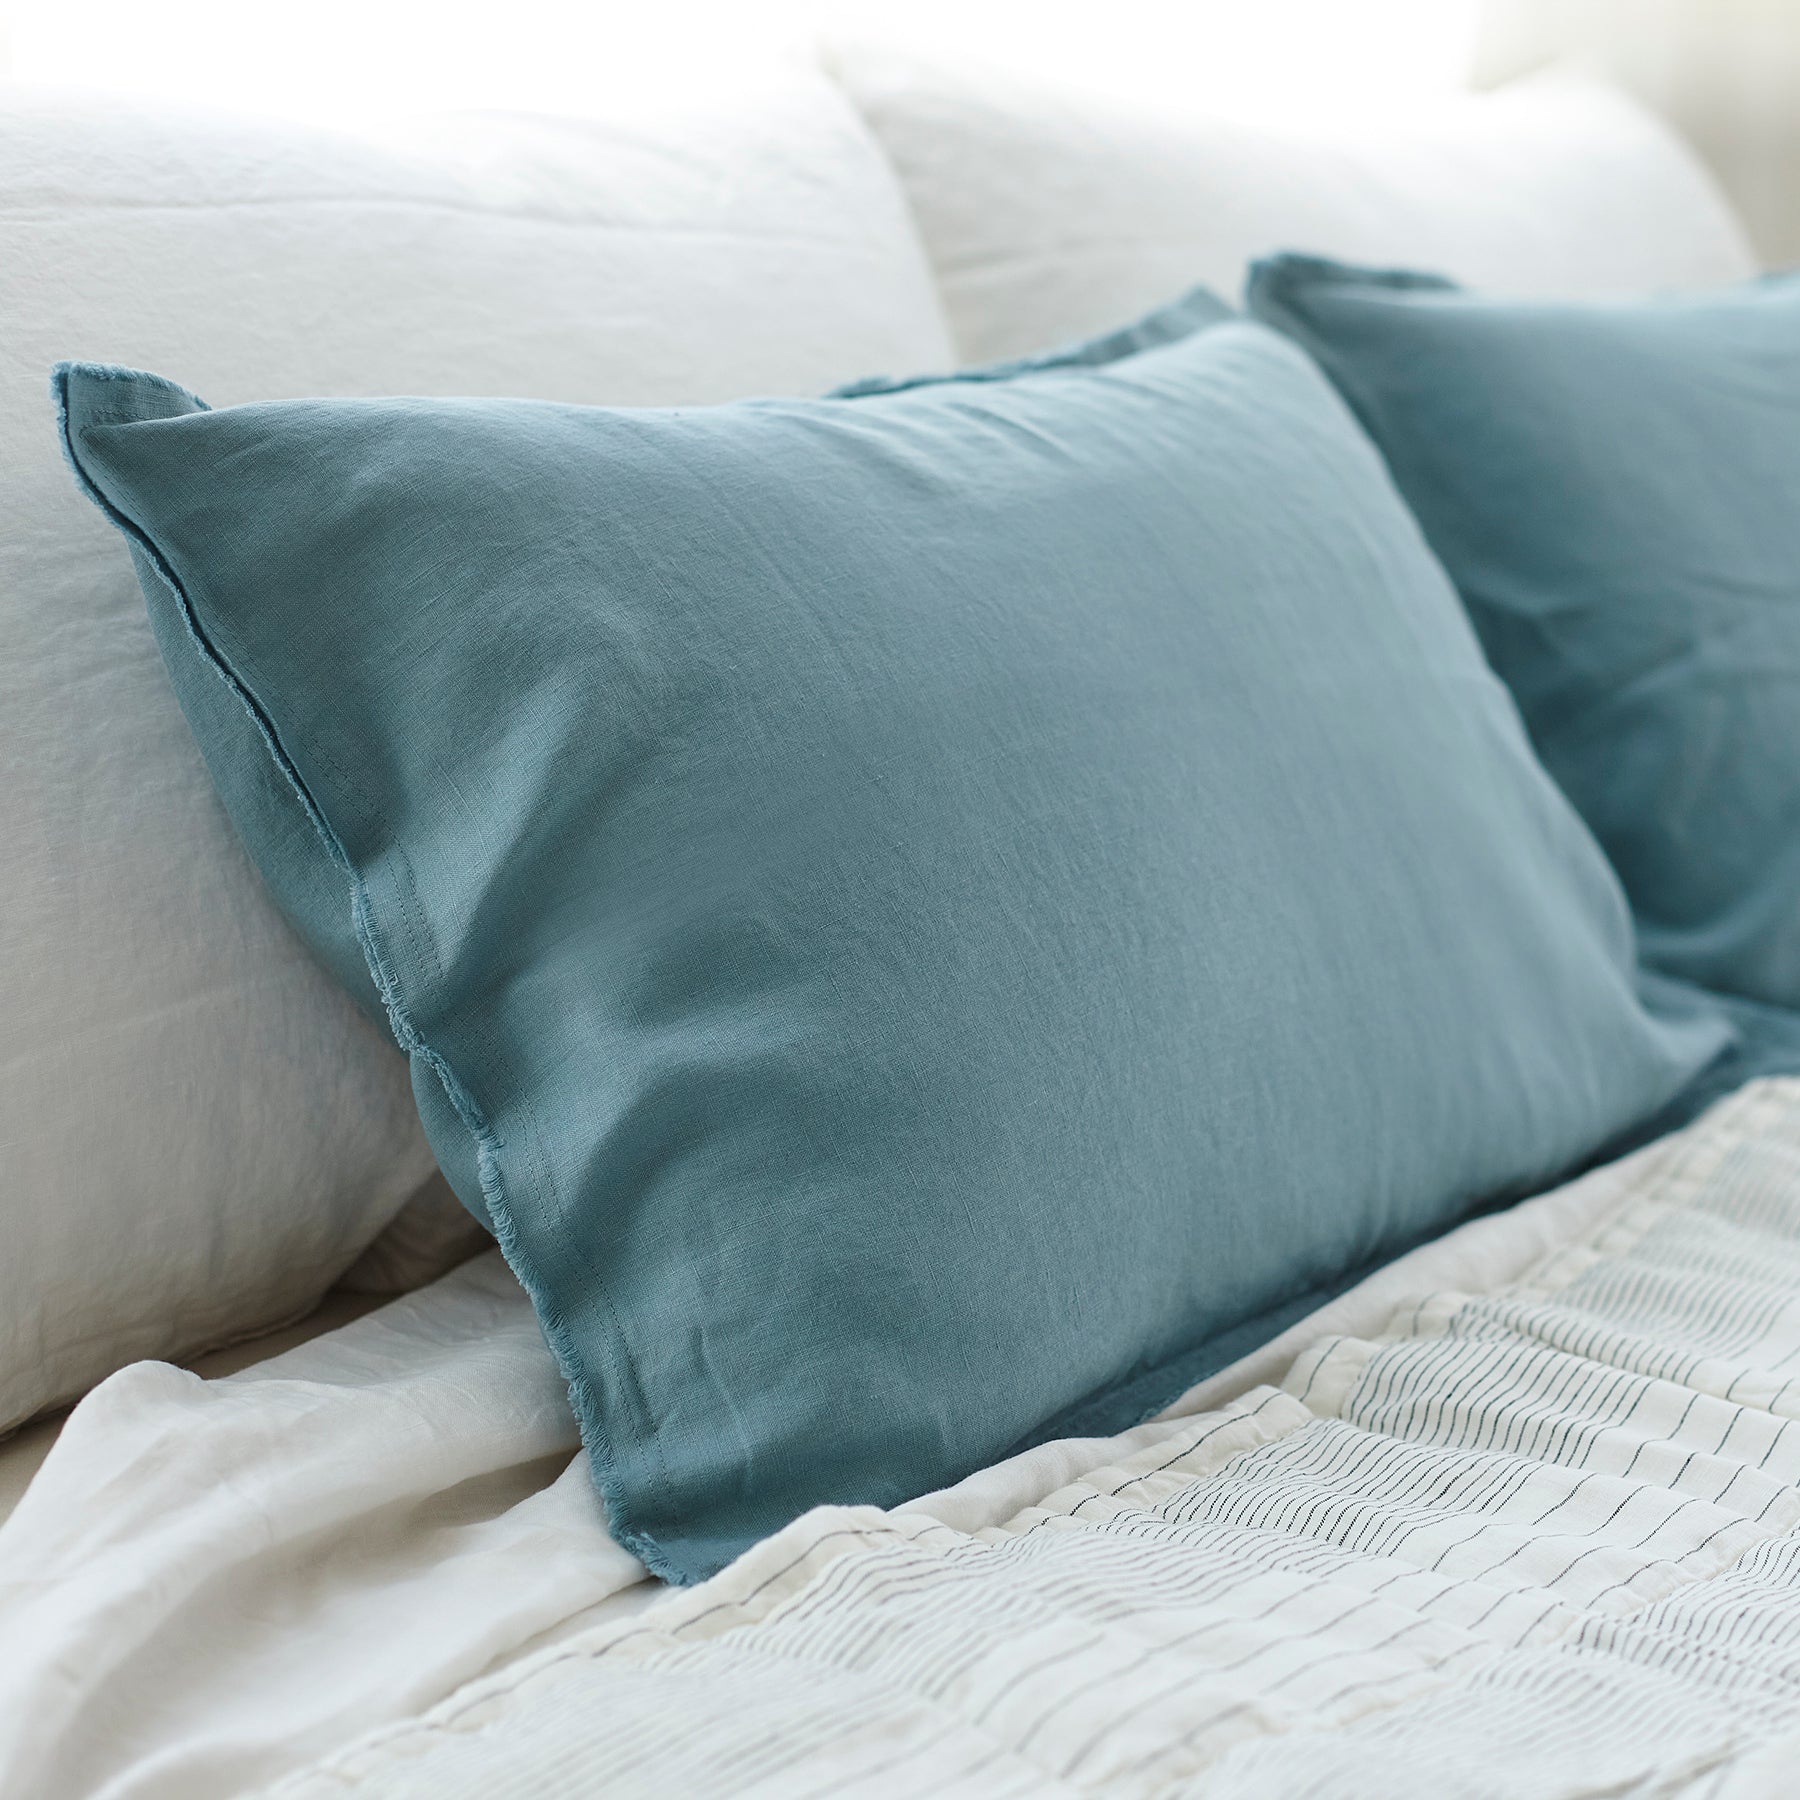 Pair of Linen Pillowcases in Dusty Blue